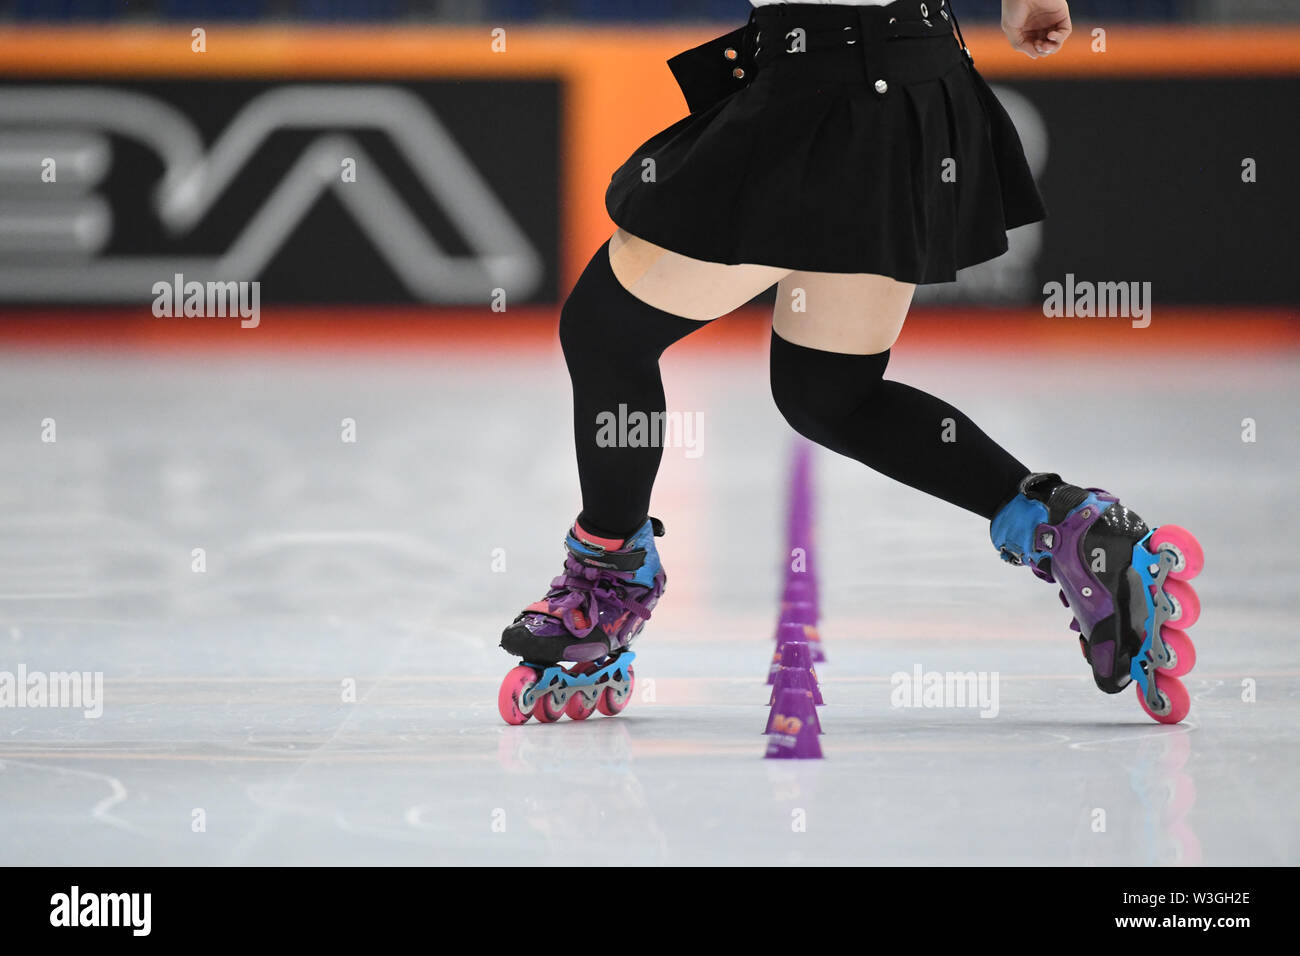 LU WEI-HSUAN from Taipei, performs in Slalom Classic for Junior ladies Inline Freestyle, WORLD ROLLER GAMES 2019, at Palau Sant Jordi, on July 11, 2019 Barcelona, Spain. Credit: Raniero Corbelletti/AFLO/Alamy Live News Stock Photo